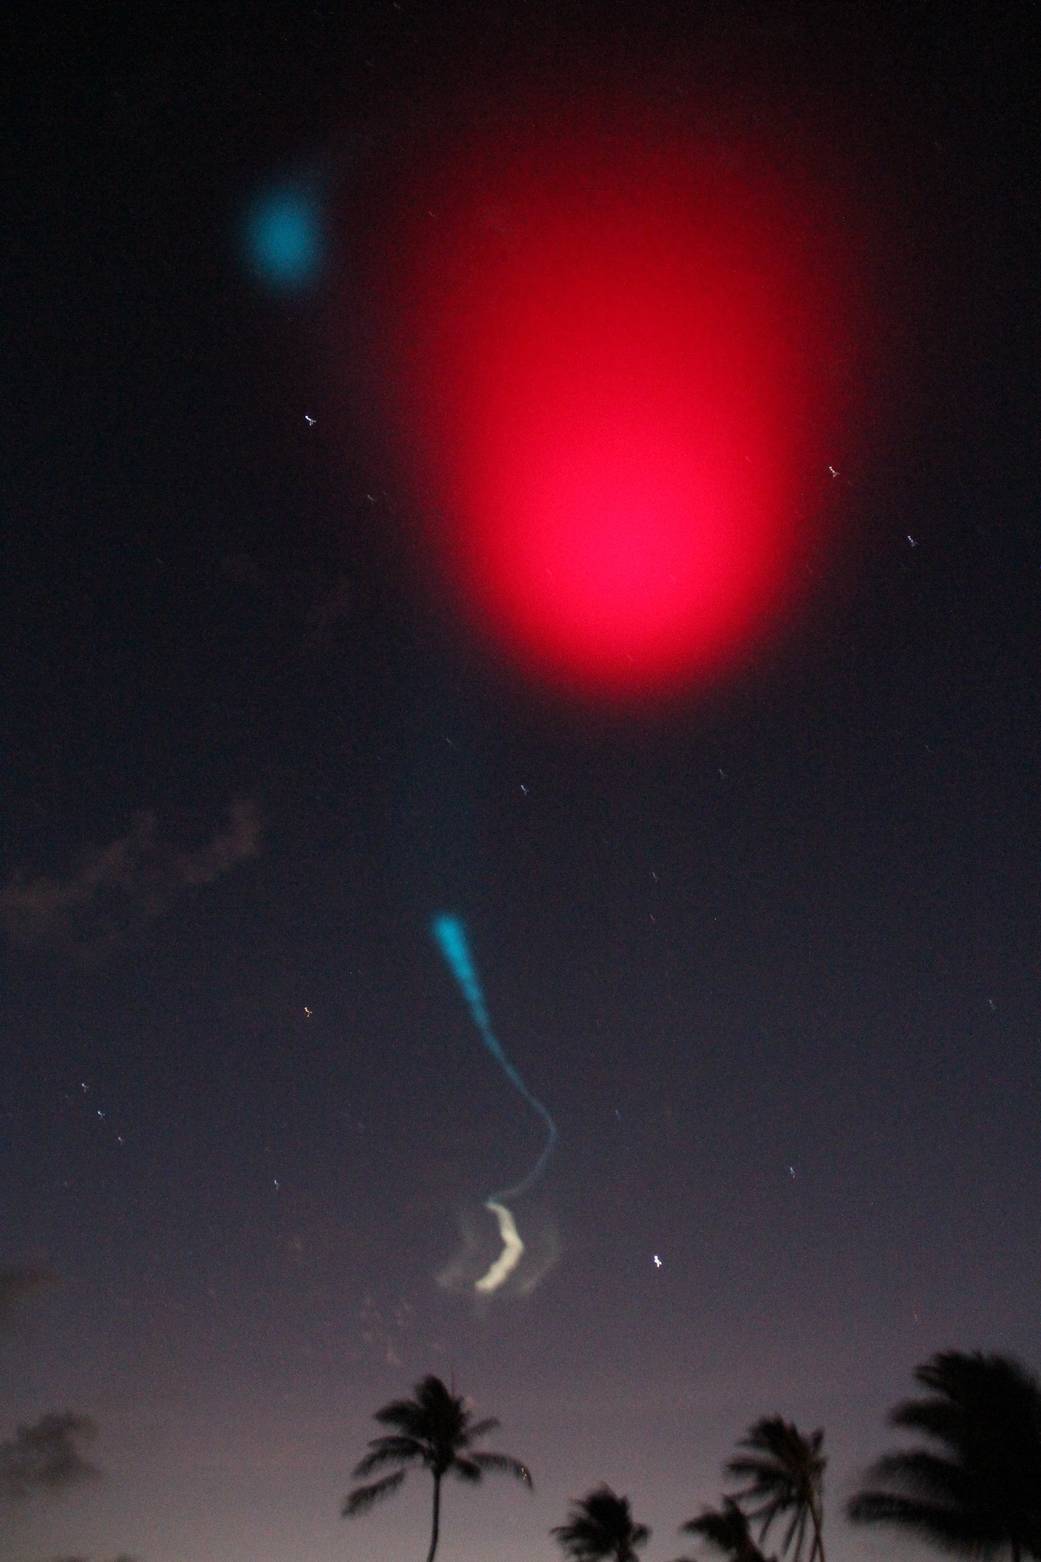 trails from nighttime rocket launch in night sky with palm trees below and bright red light above